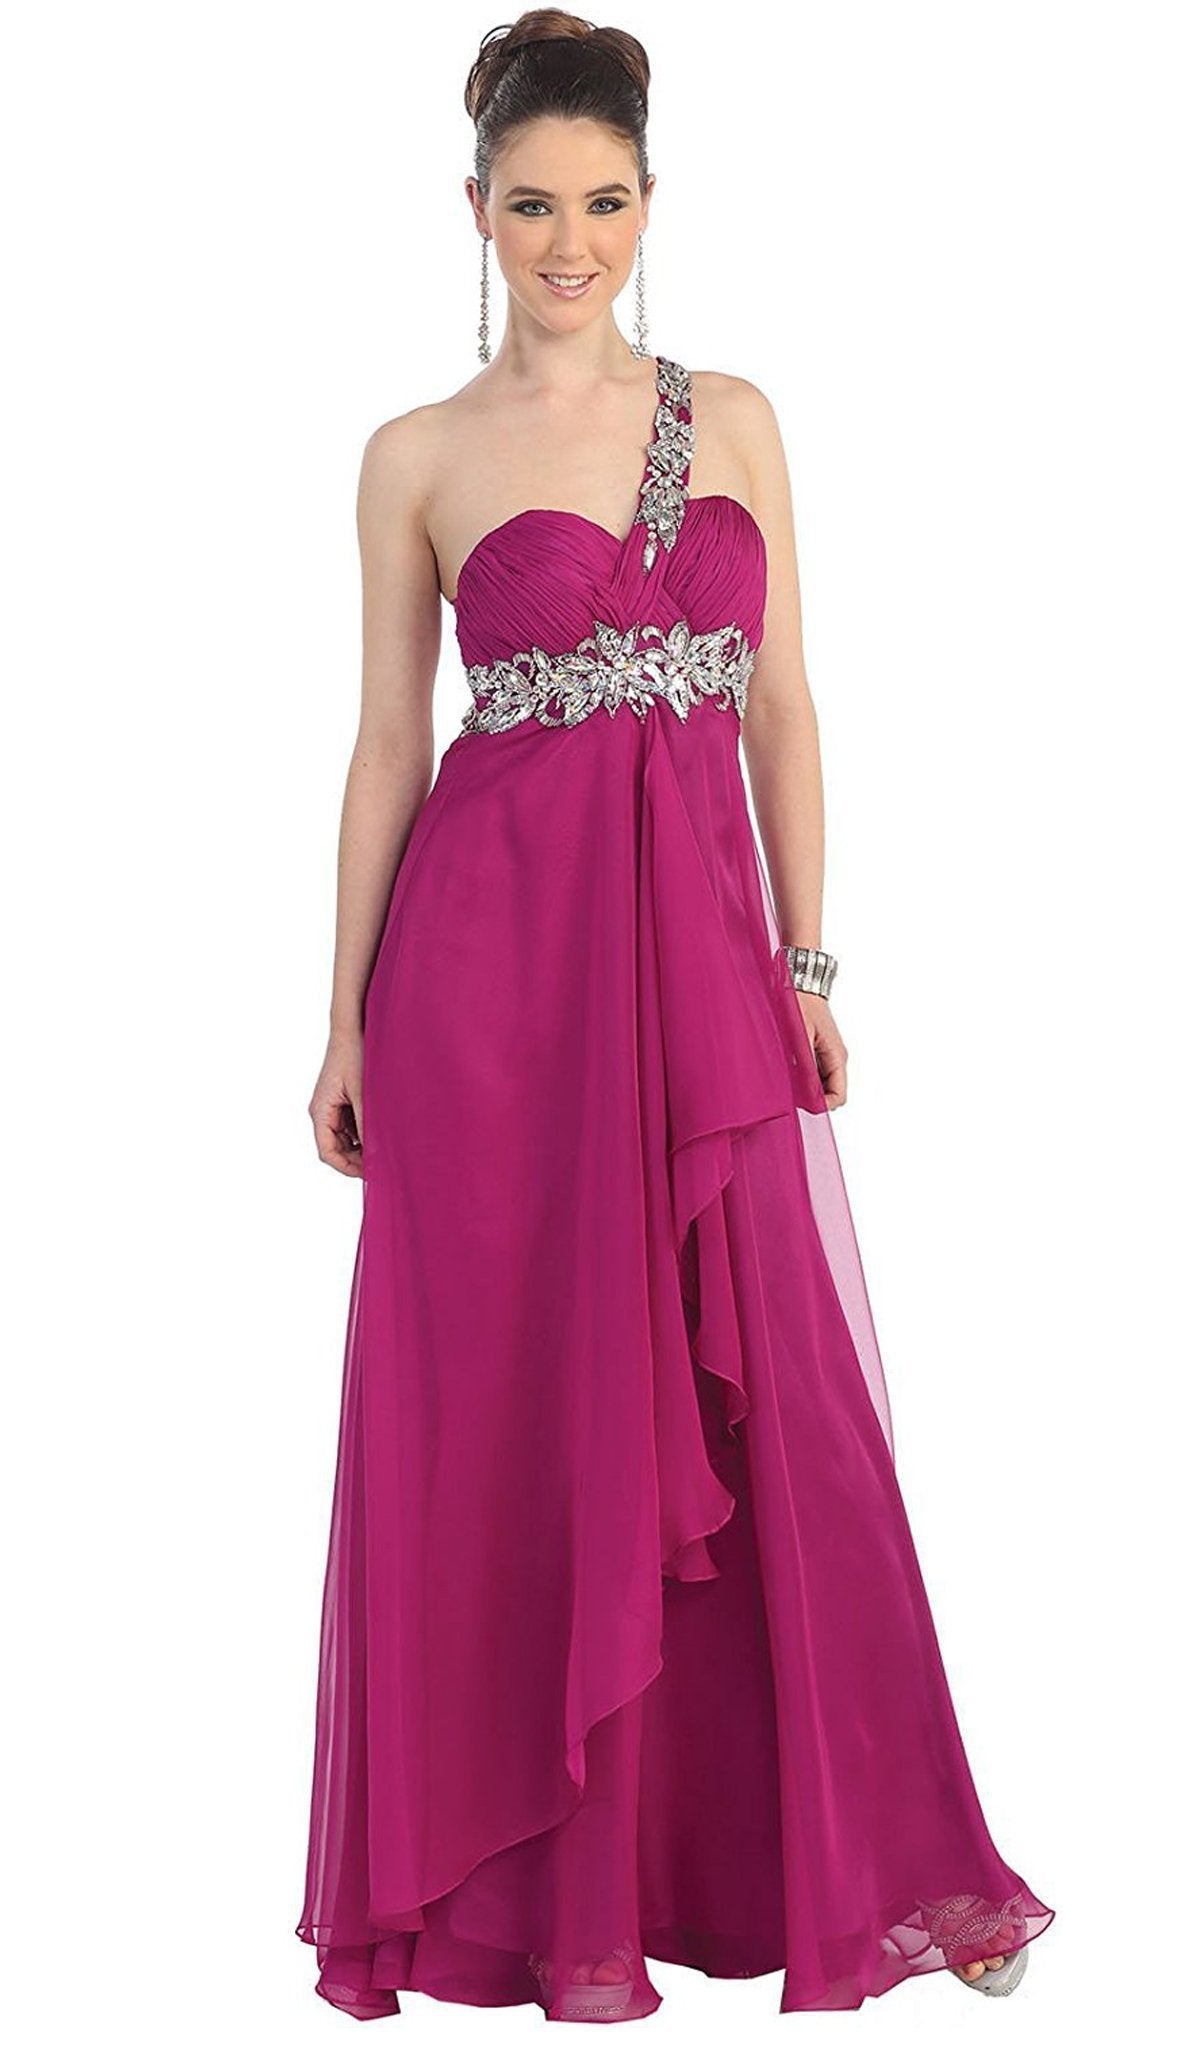 May Queen - MQ1028 Ornate Strap Ruched Sweetheart A-line Prom Dress Special Occasion Dress 4 / Magenta